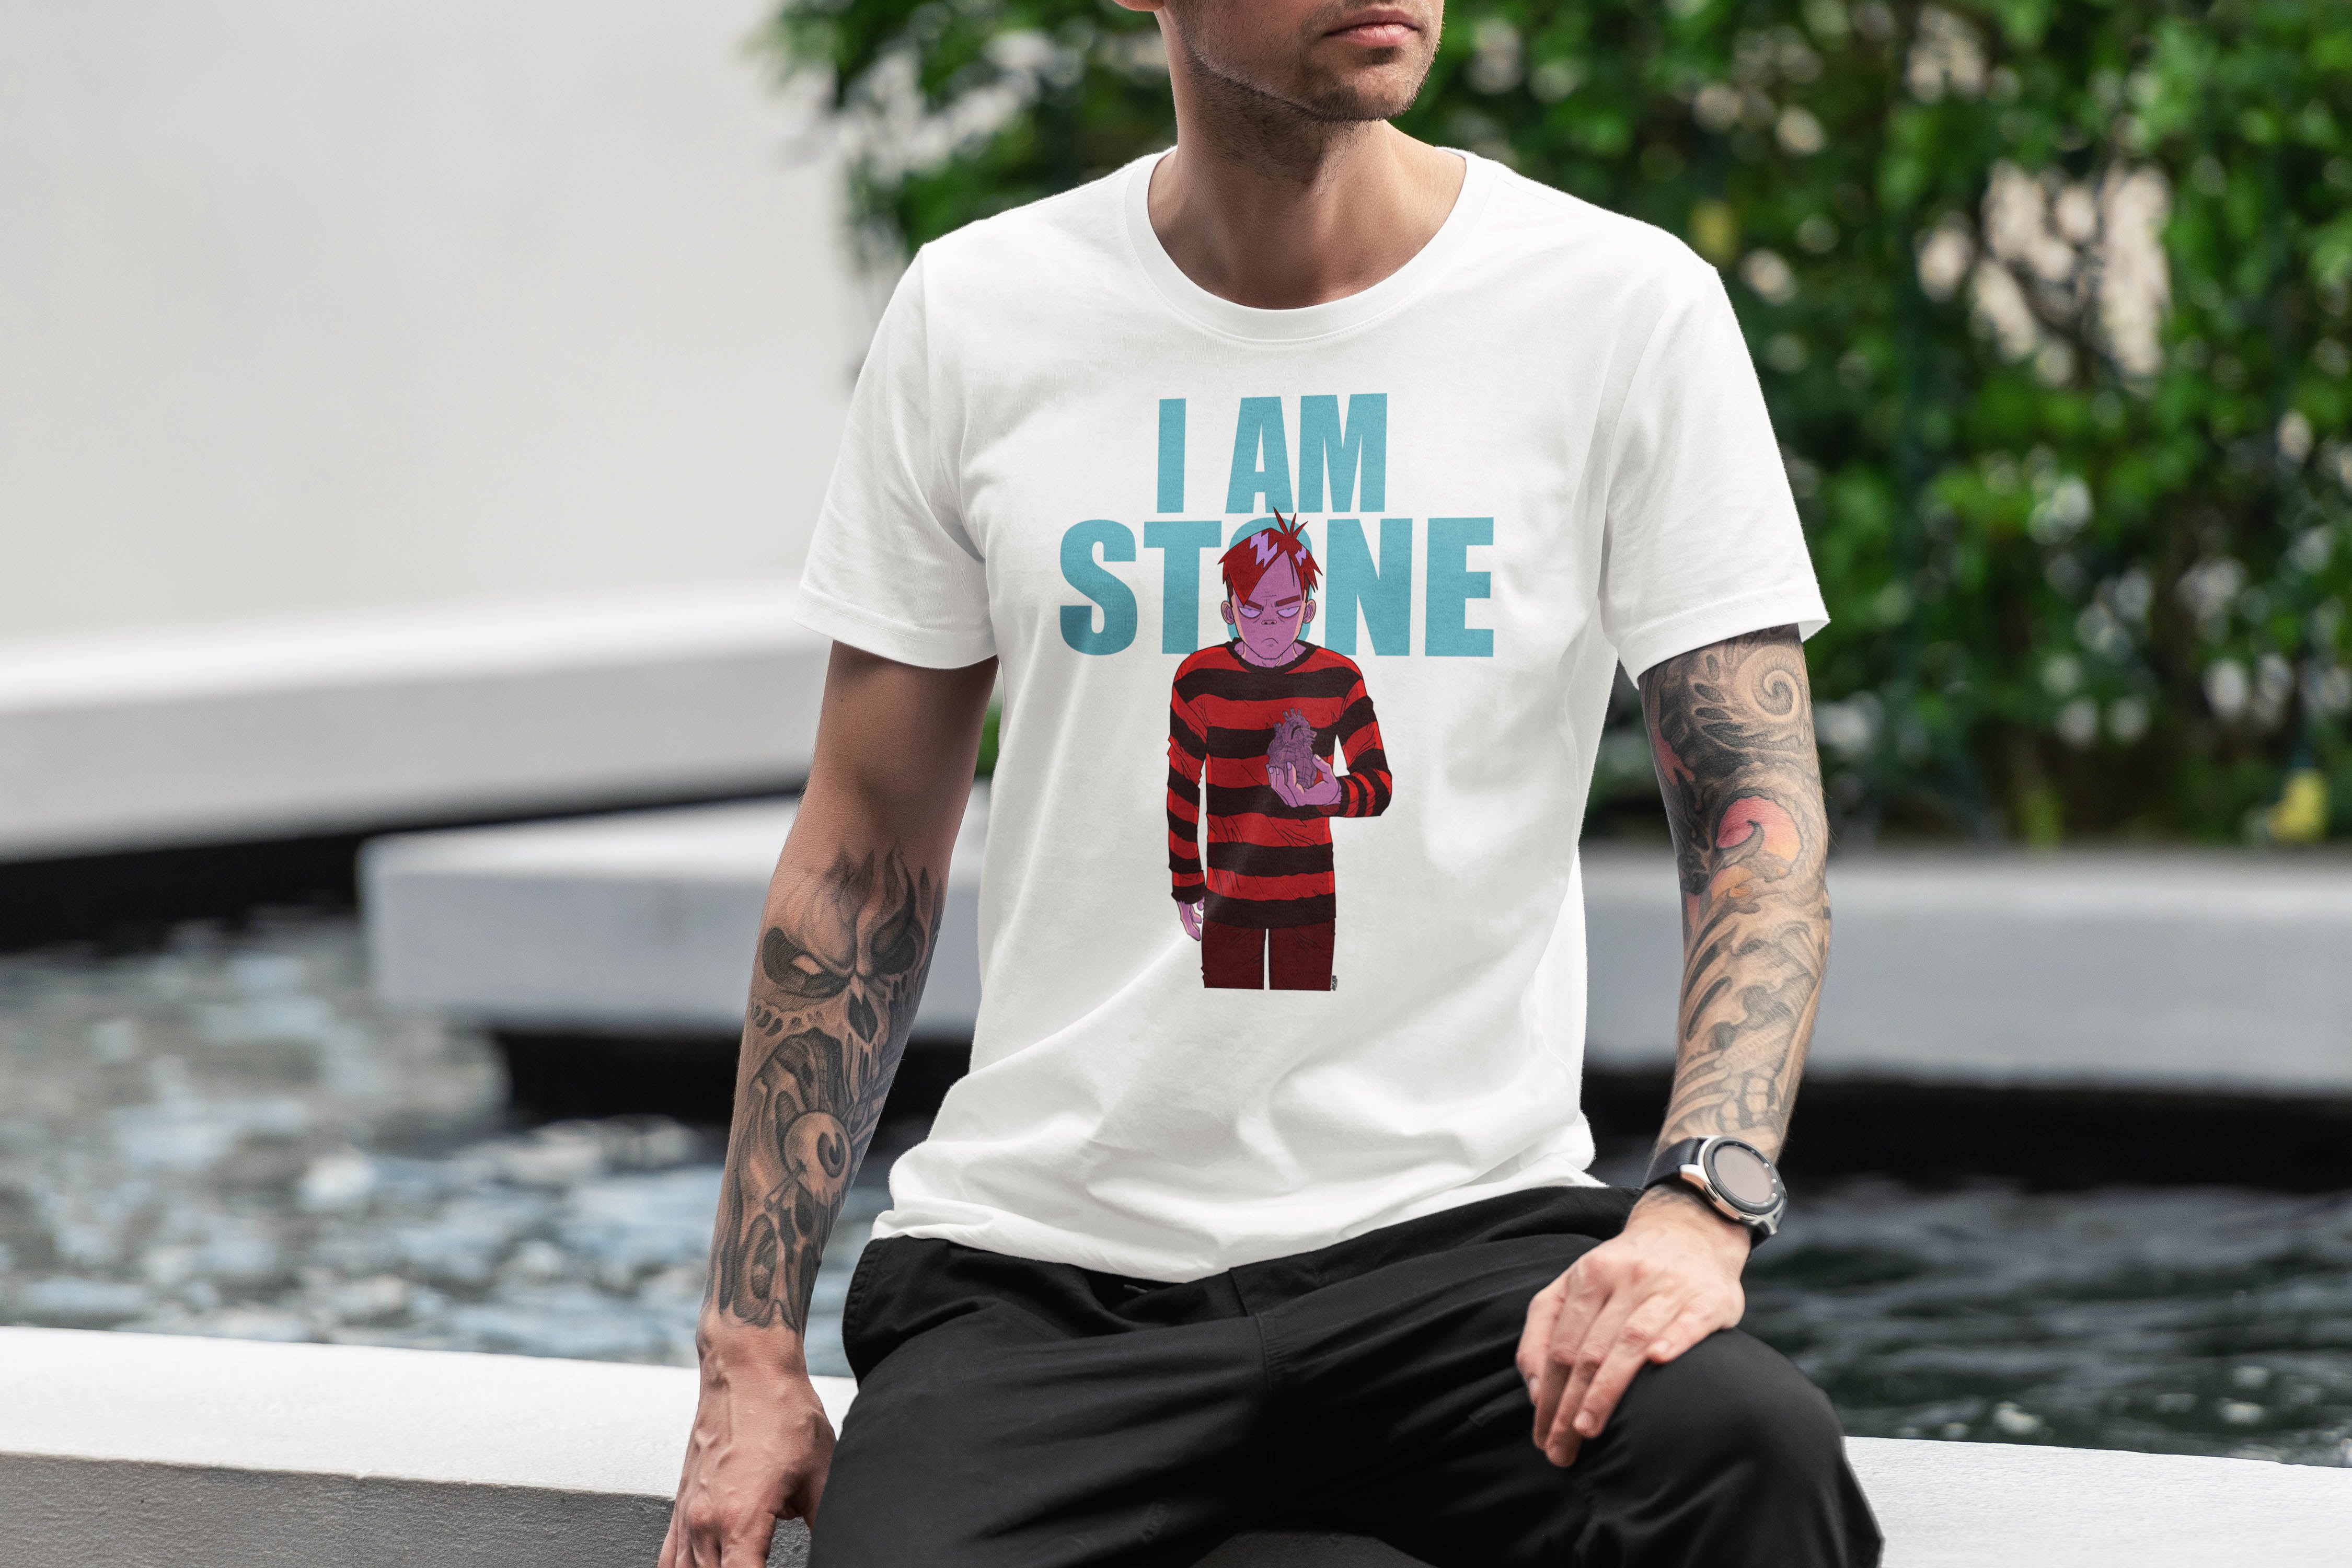 Unique and cool Gorillaz-style heart of stone T-Shirt illustration